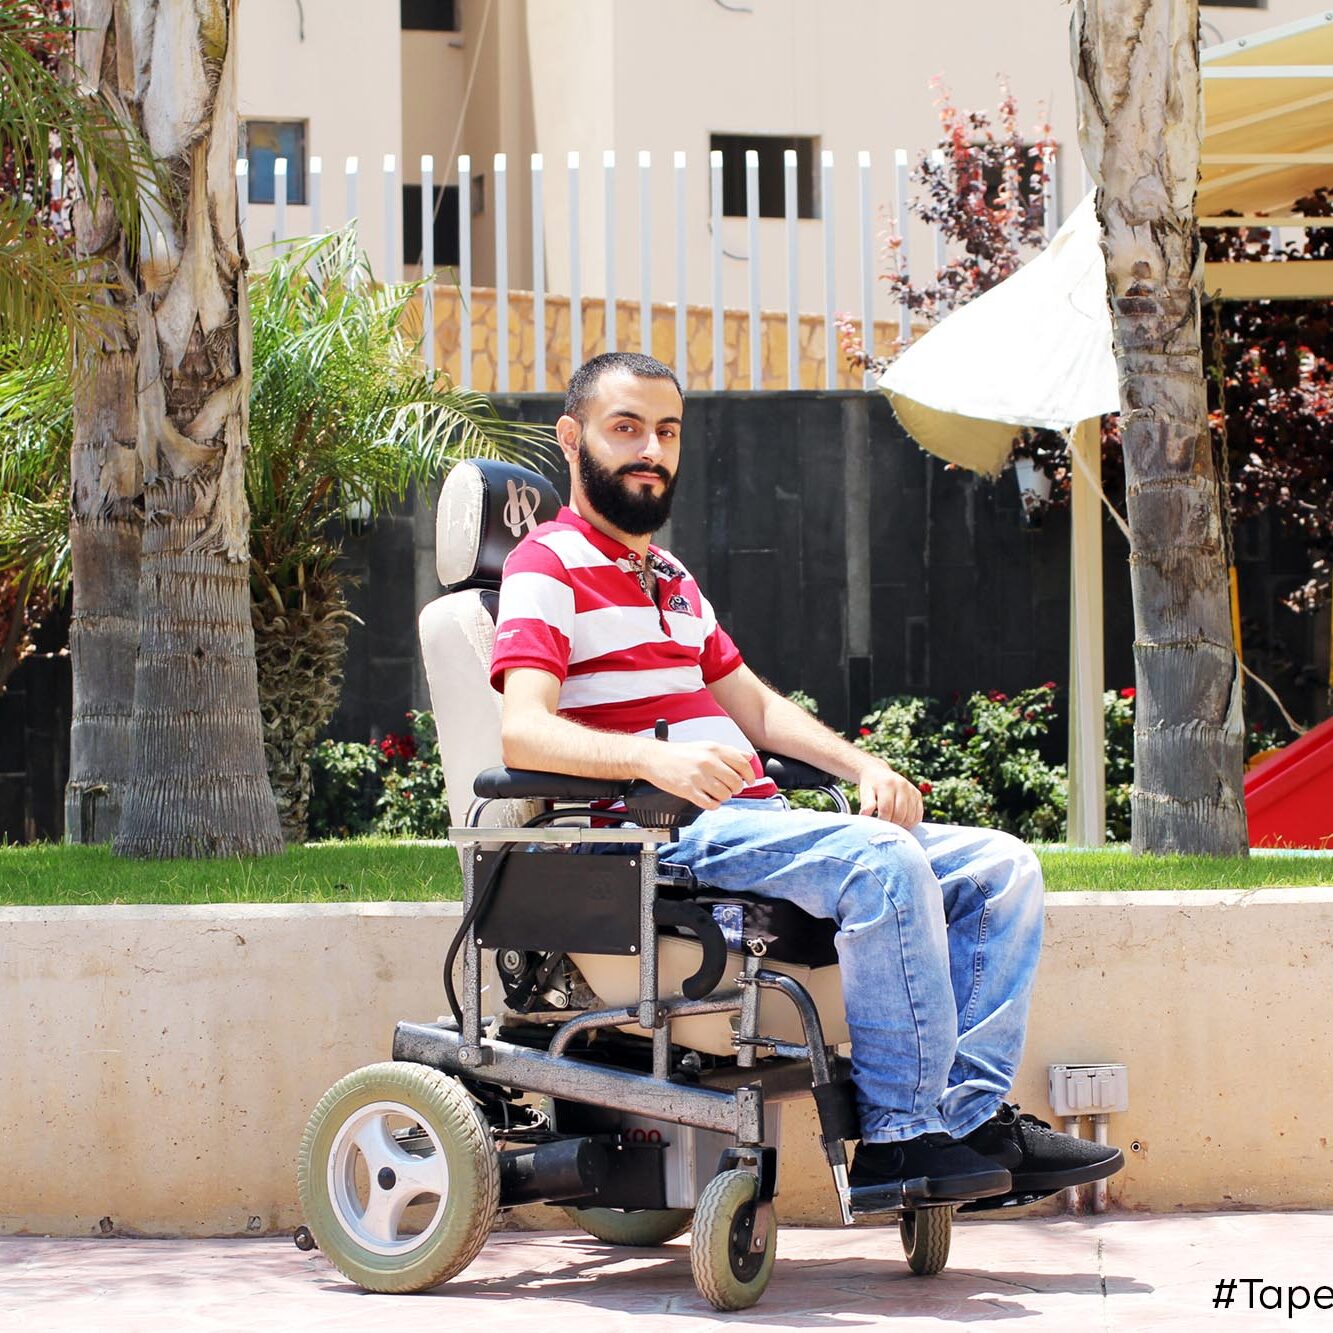 Mohammed was left paralyzed at the age of 16